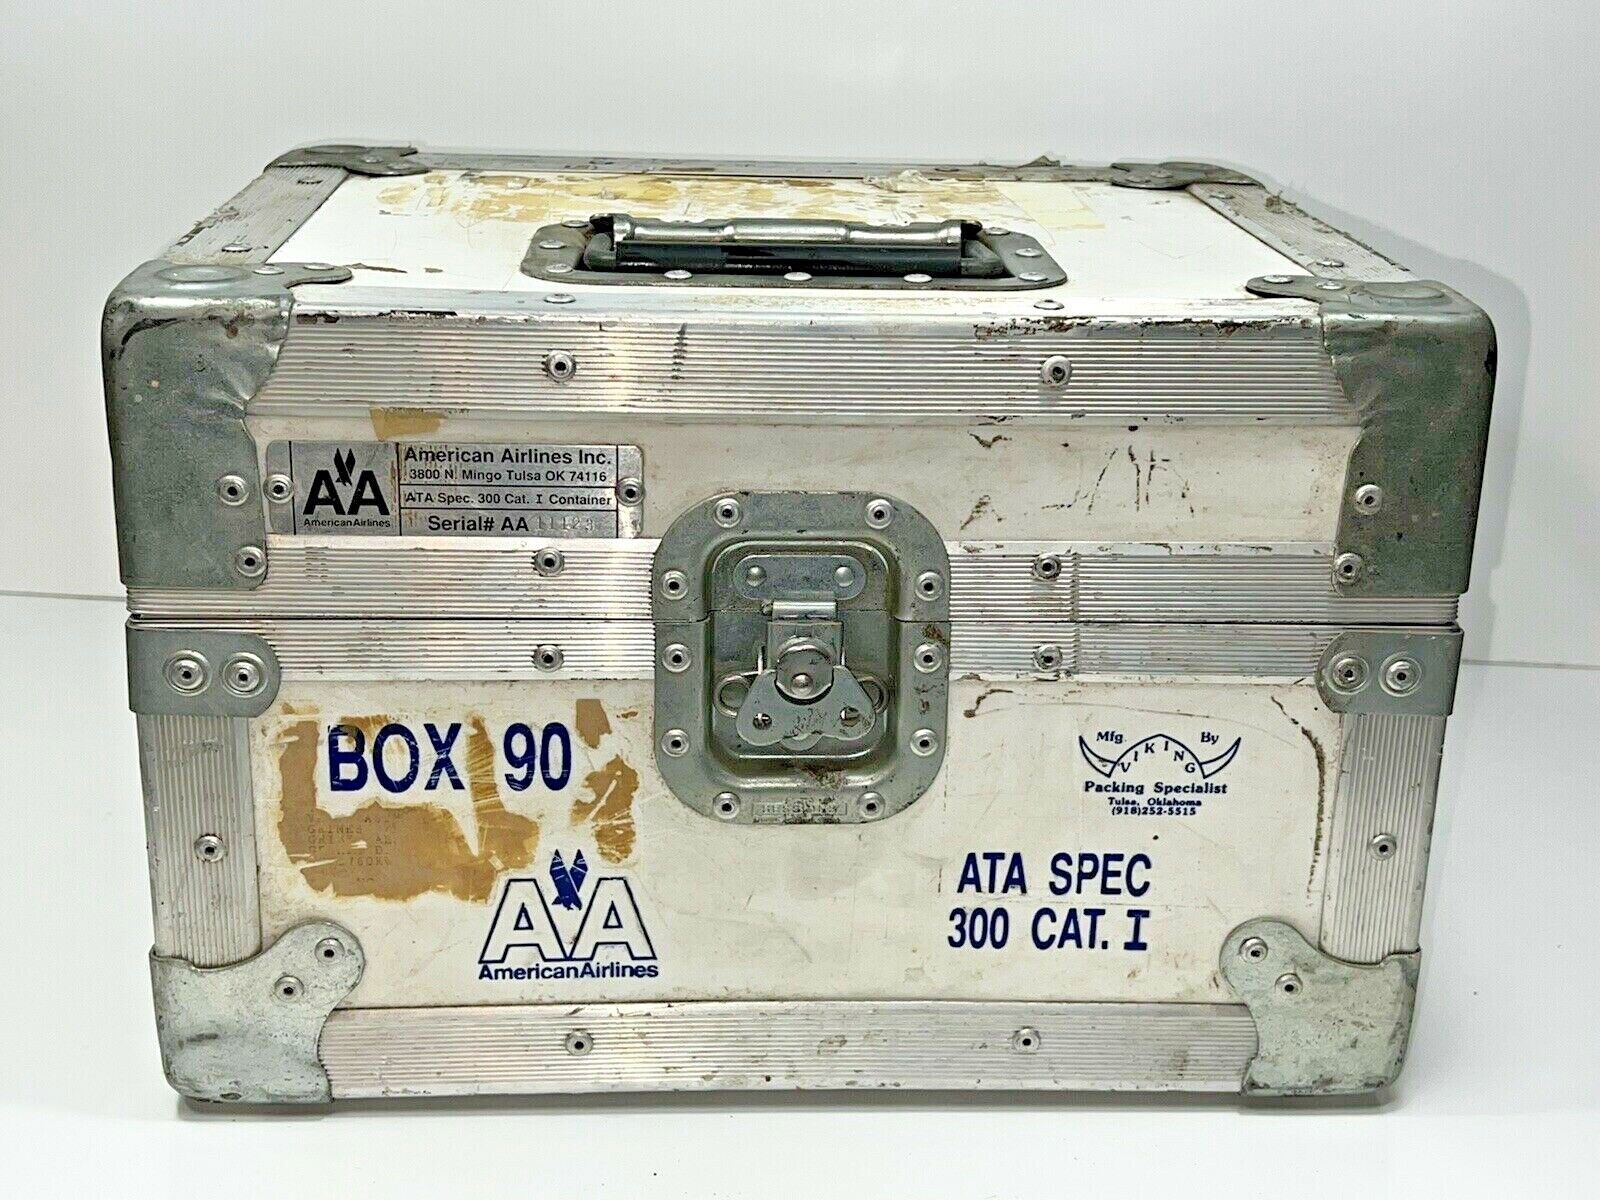 Vintage Airlines Shipping Container Storage ATA 300 Spec Container CAT 1 -BOX 90